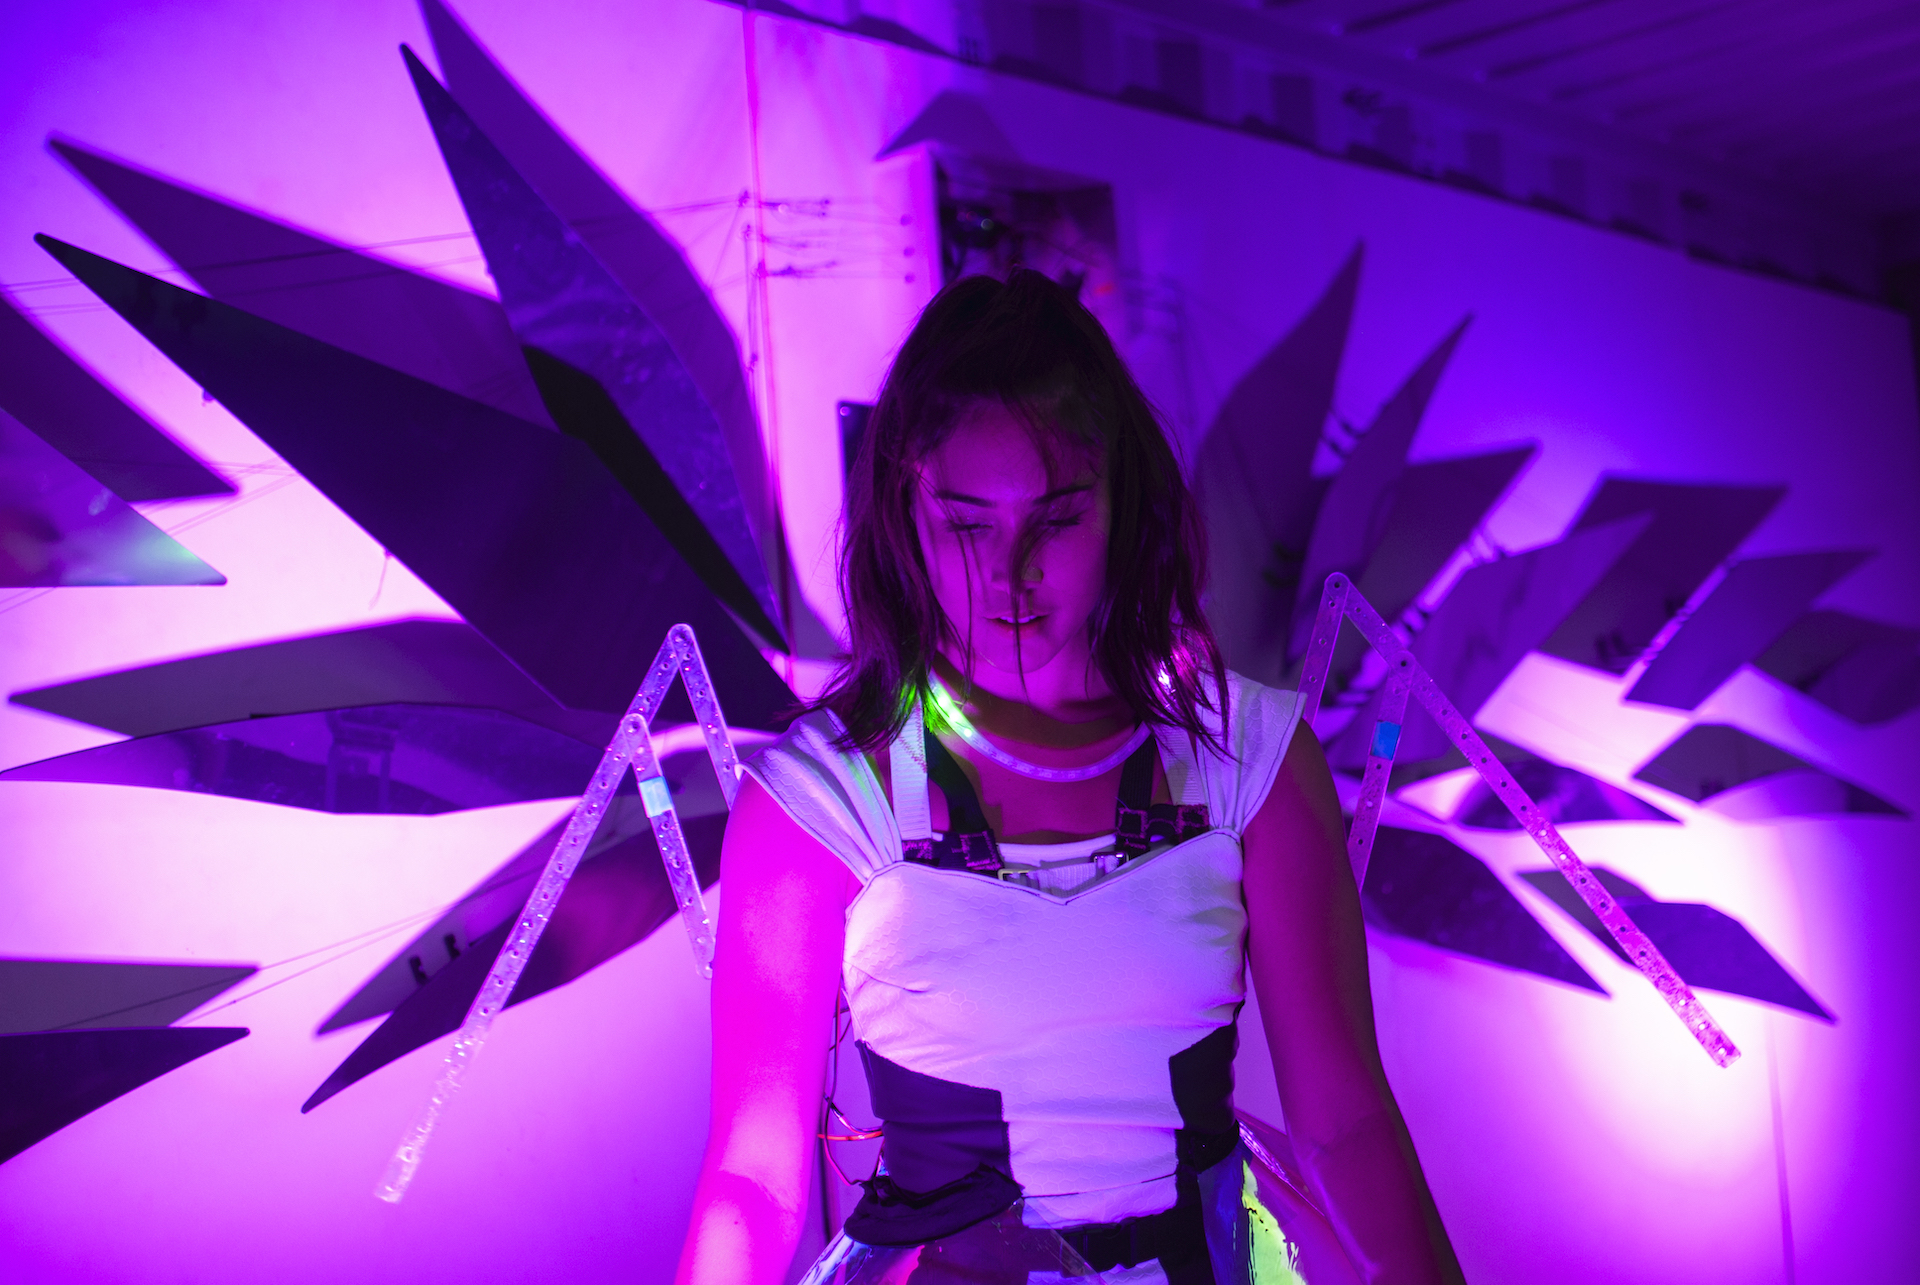 dancer performing and looking down, wearing a pair of strap on interactive robotic wings made of clear material